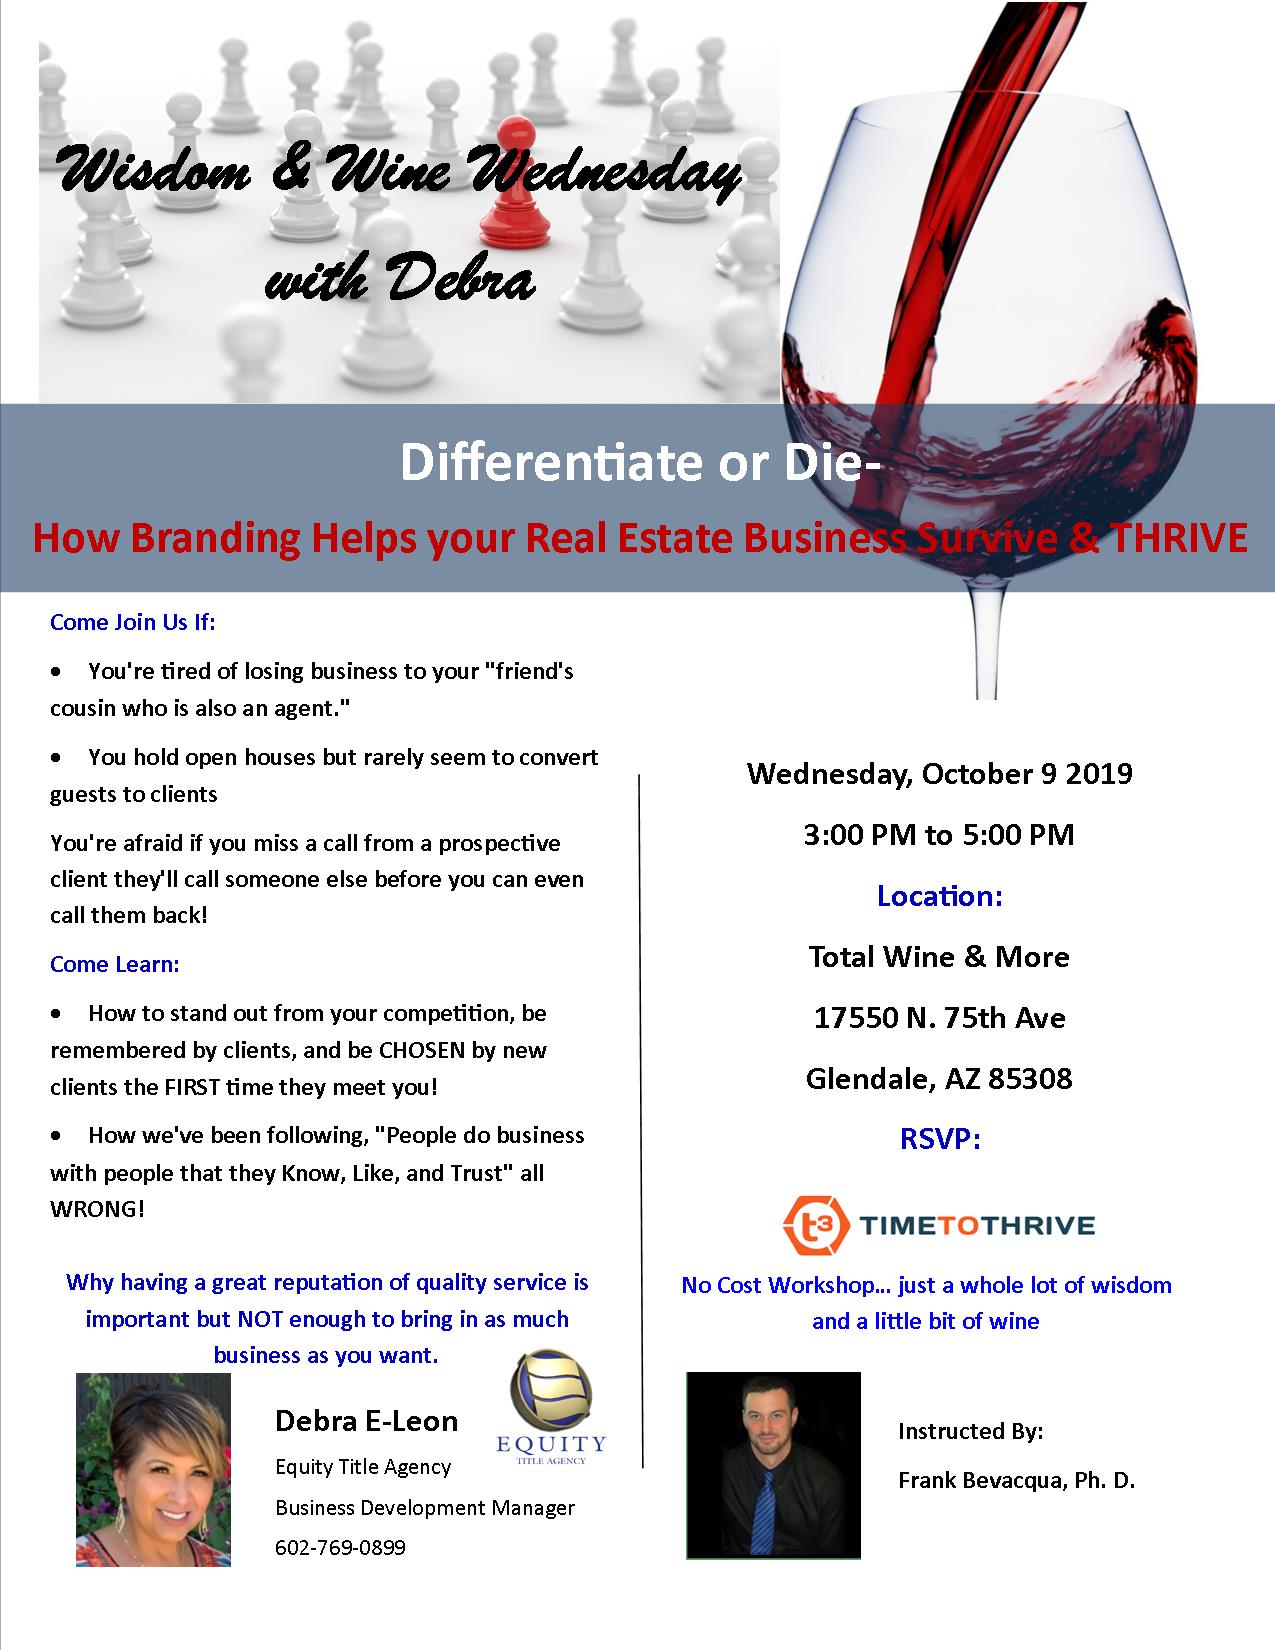 Differentiate or Die- Wine and Wisdom Wednesday